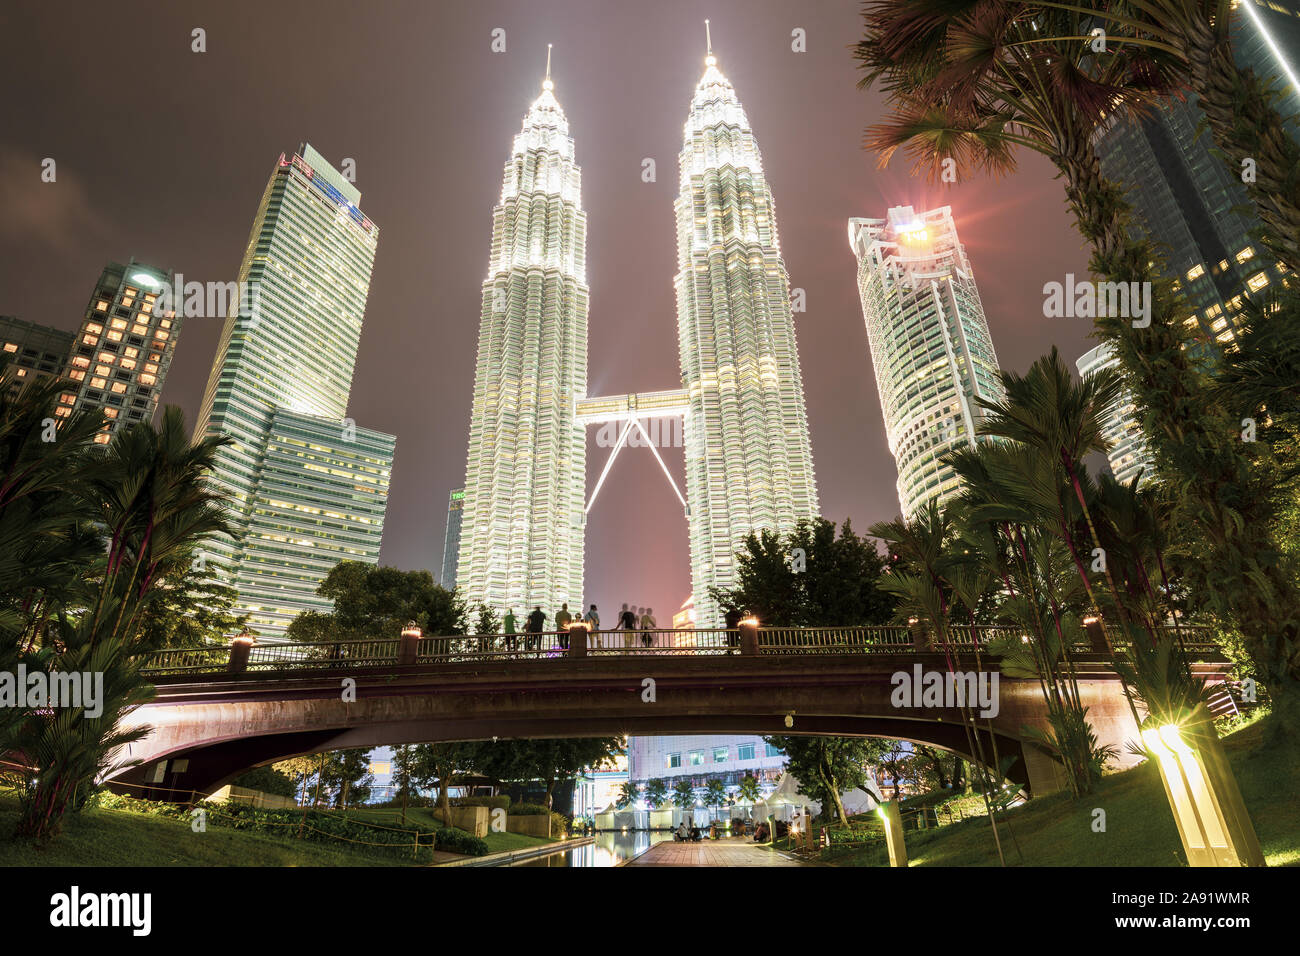 Stunning view of the Petronas Twin Tower illuminated at dusk. The Petronas Towers are twin skyscrapers in Kuala Lumpur. Stock Photo